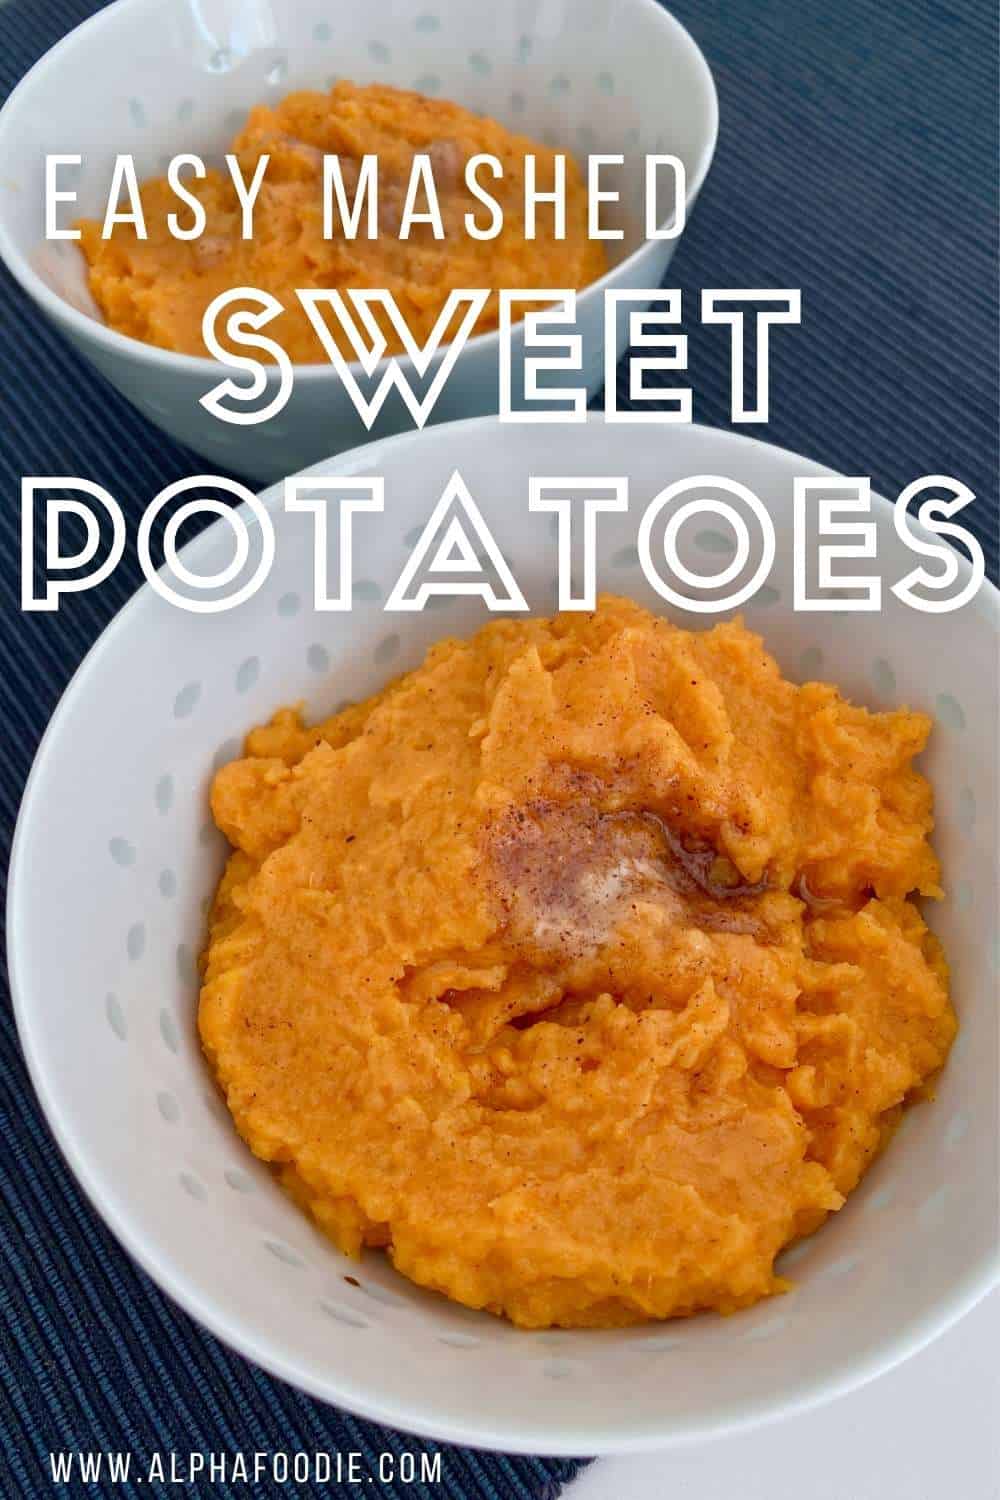 Easy Mashed Sweet Potatoes - Alphafoodie